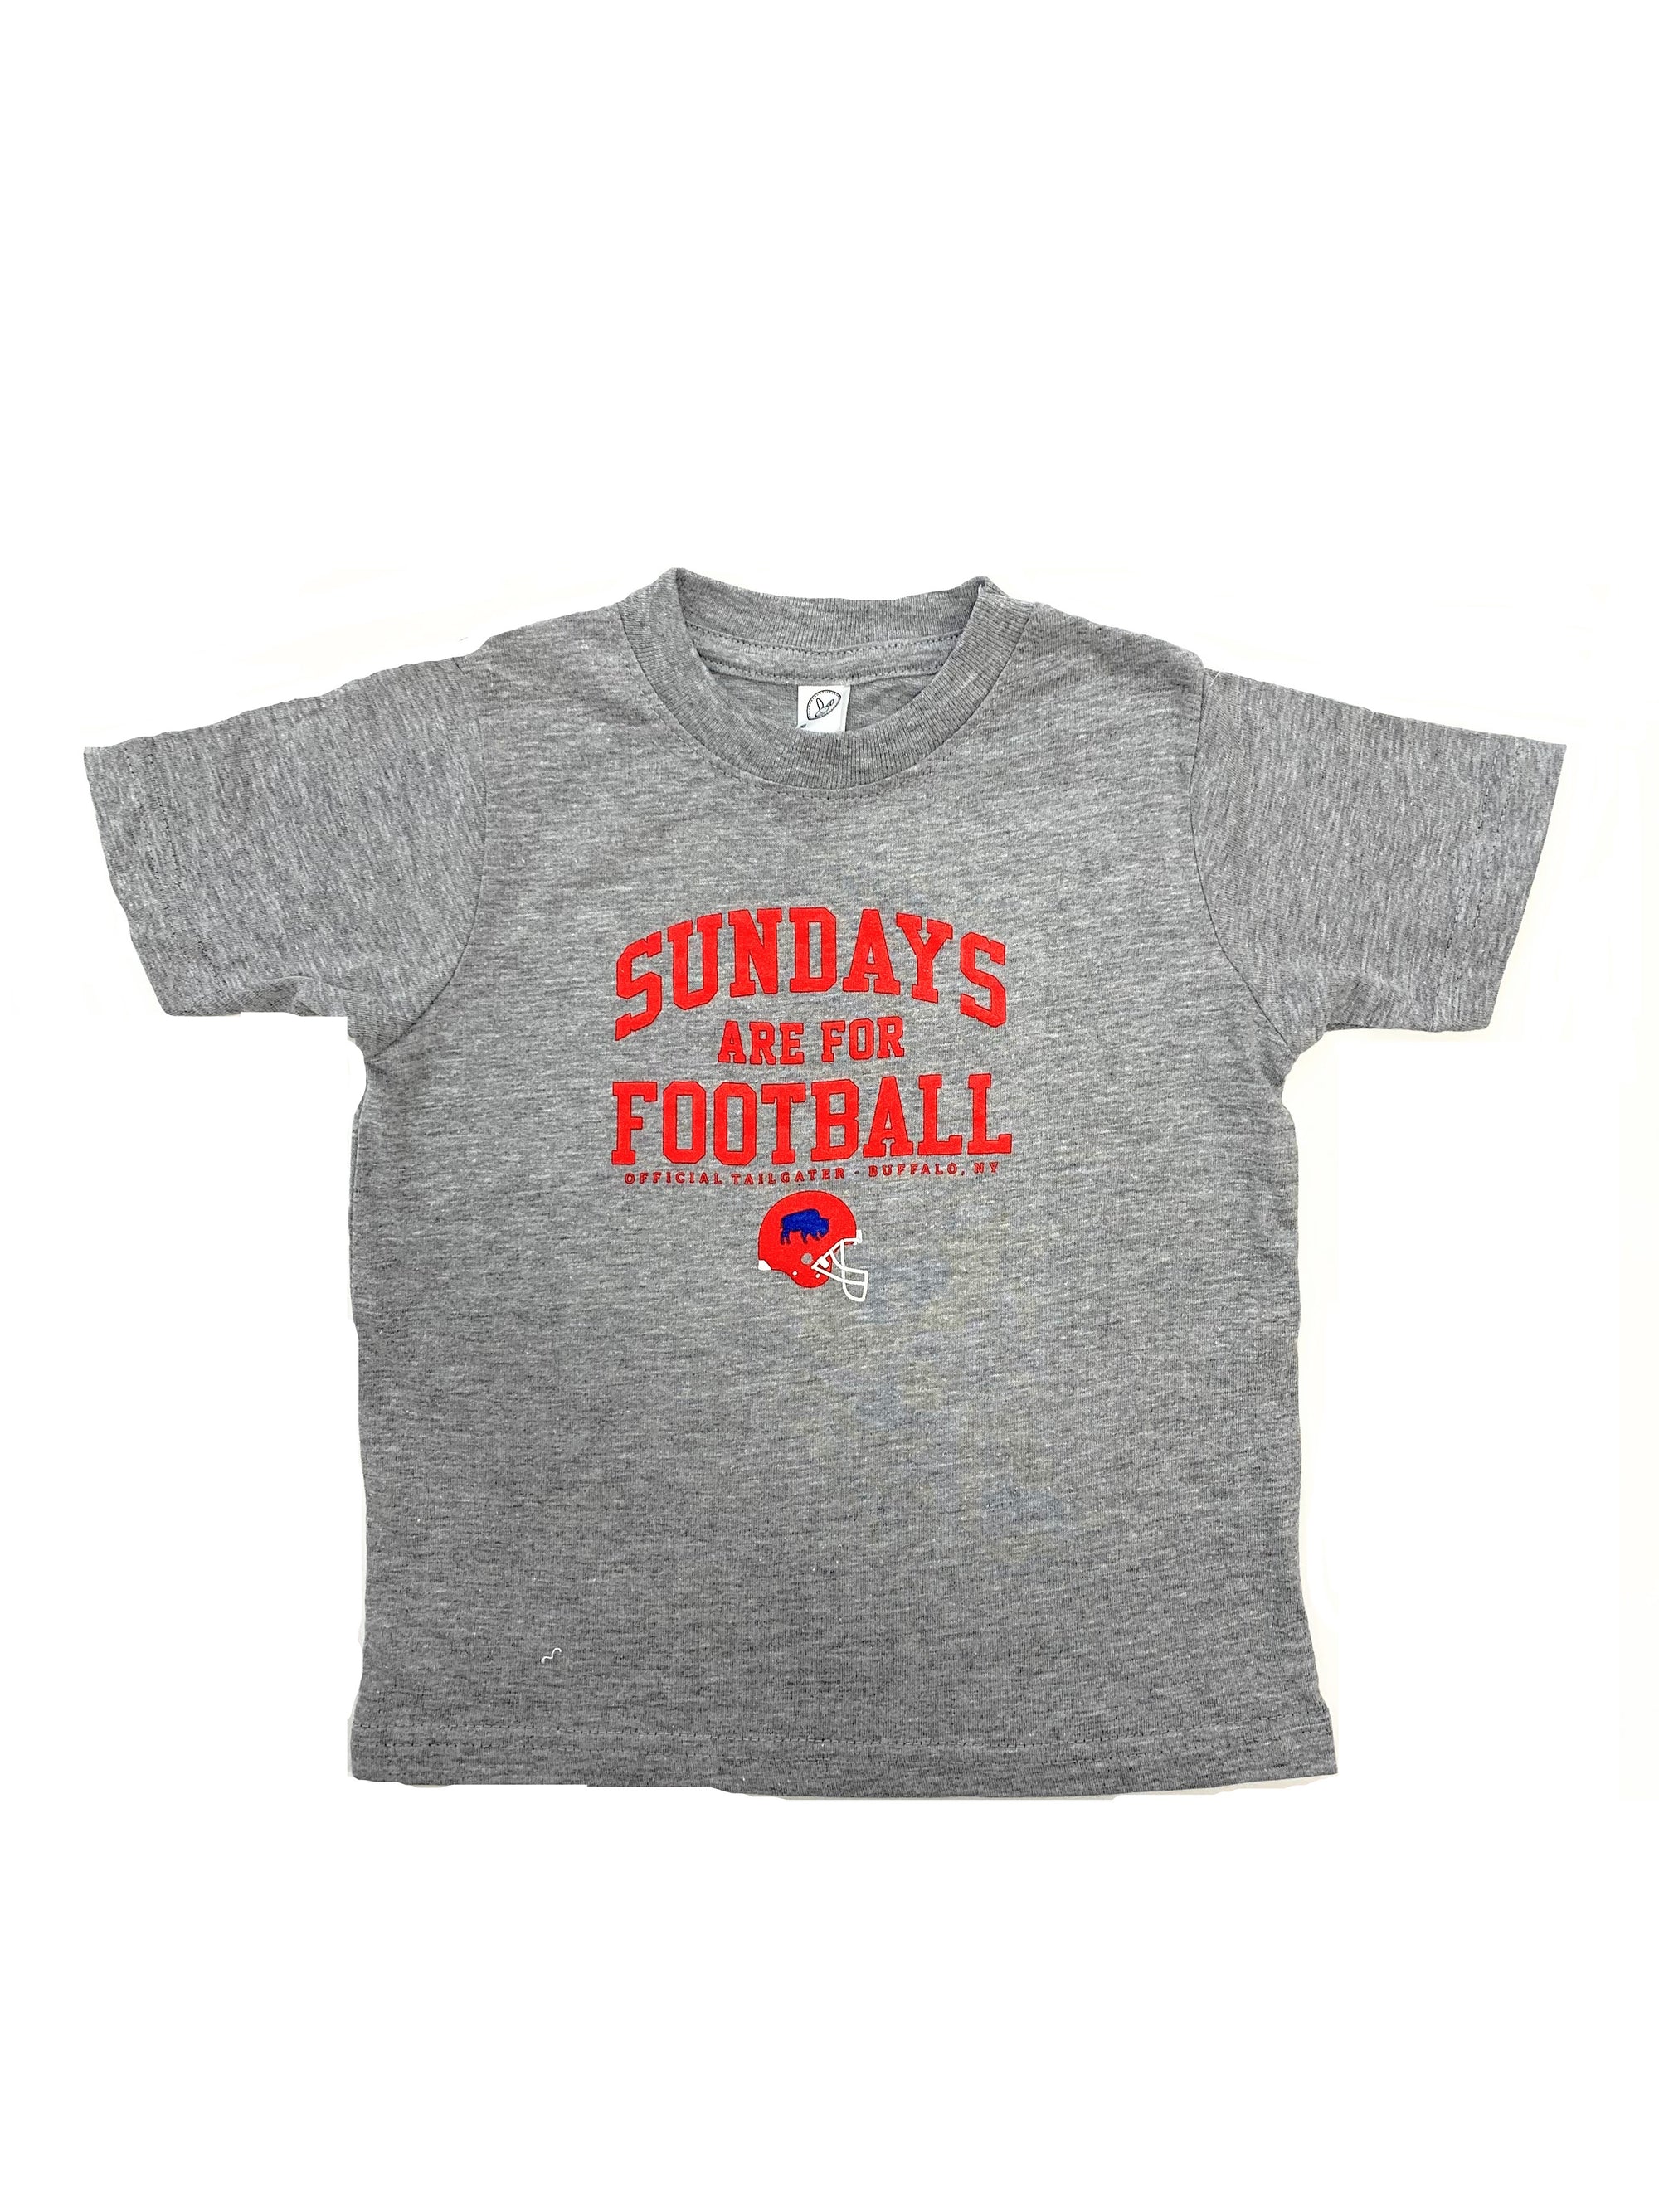 &quot;Sundays are for Football&quot; Toddler Short Sleeve T-Shirt